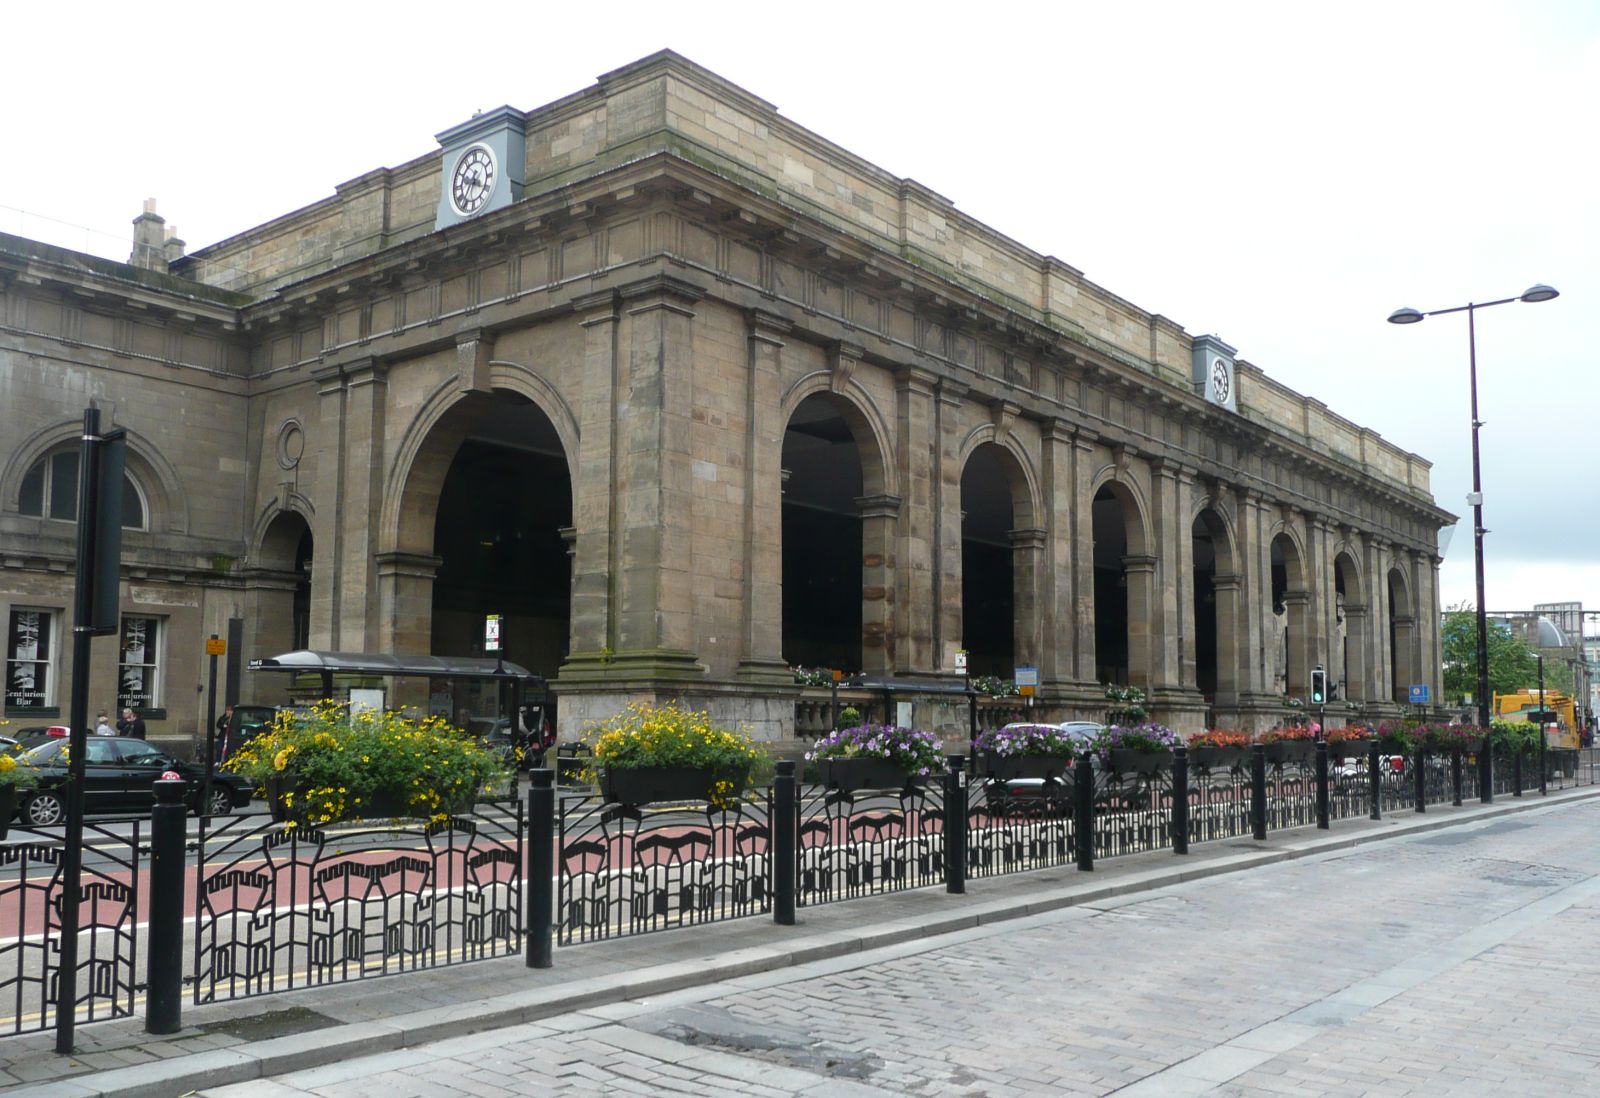 Photograph of Newcastle Central Station